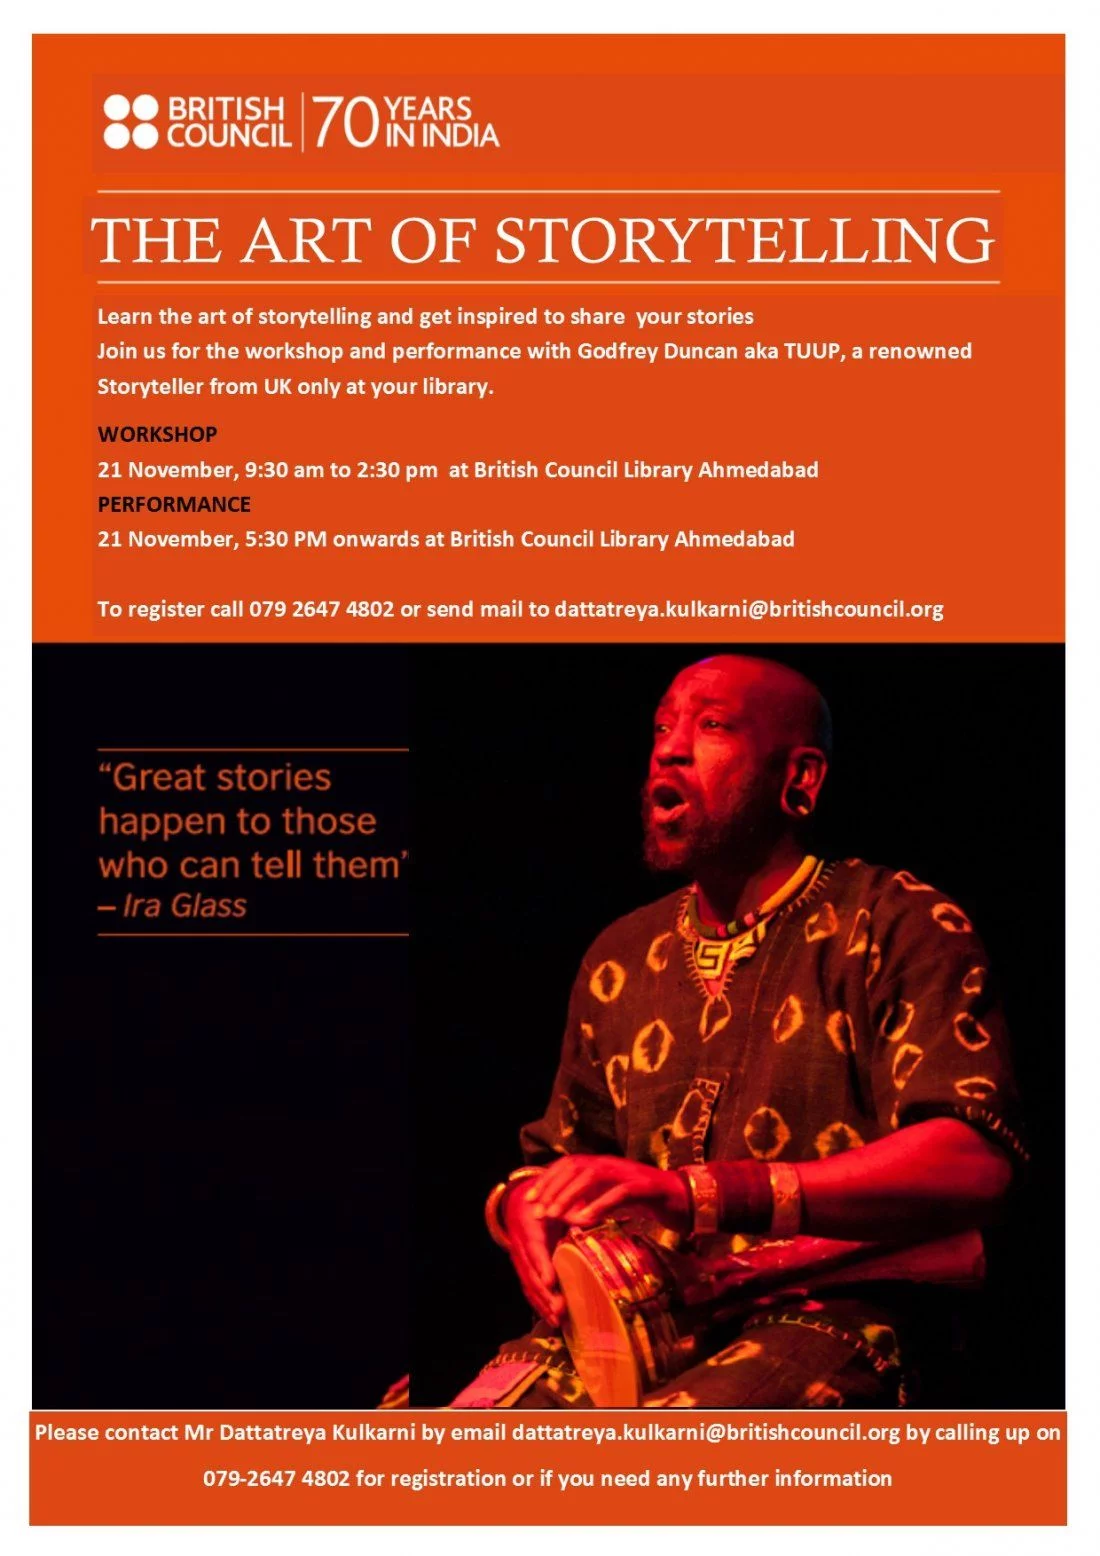 THE ART OF STORYTELLING WORKSHOP BY Godfrey Duncan (TUUP)